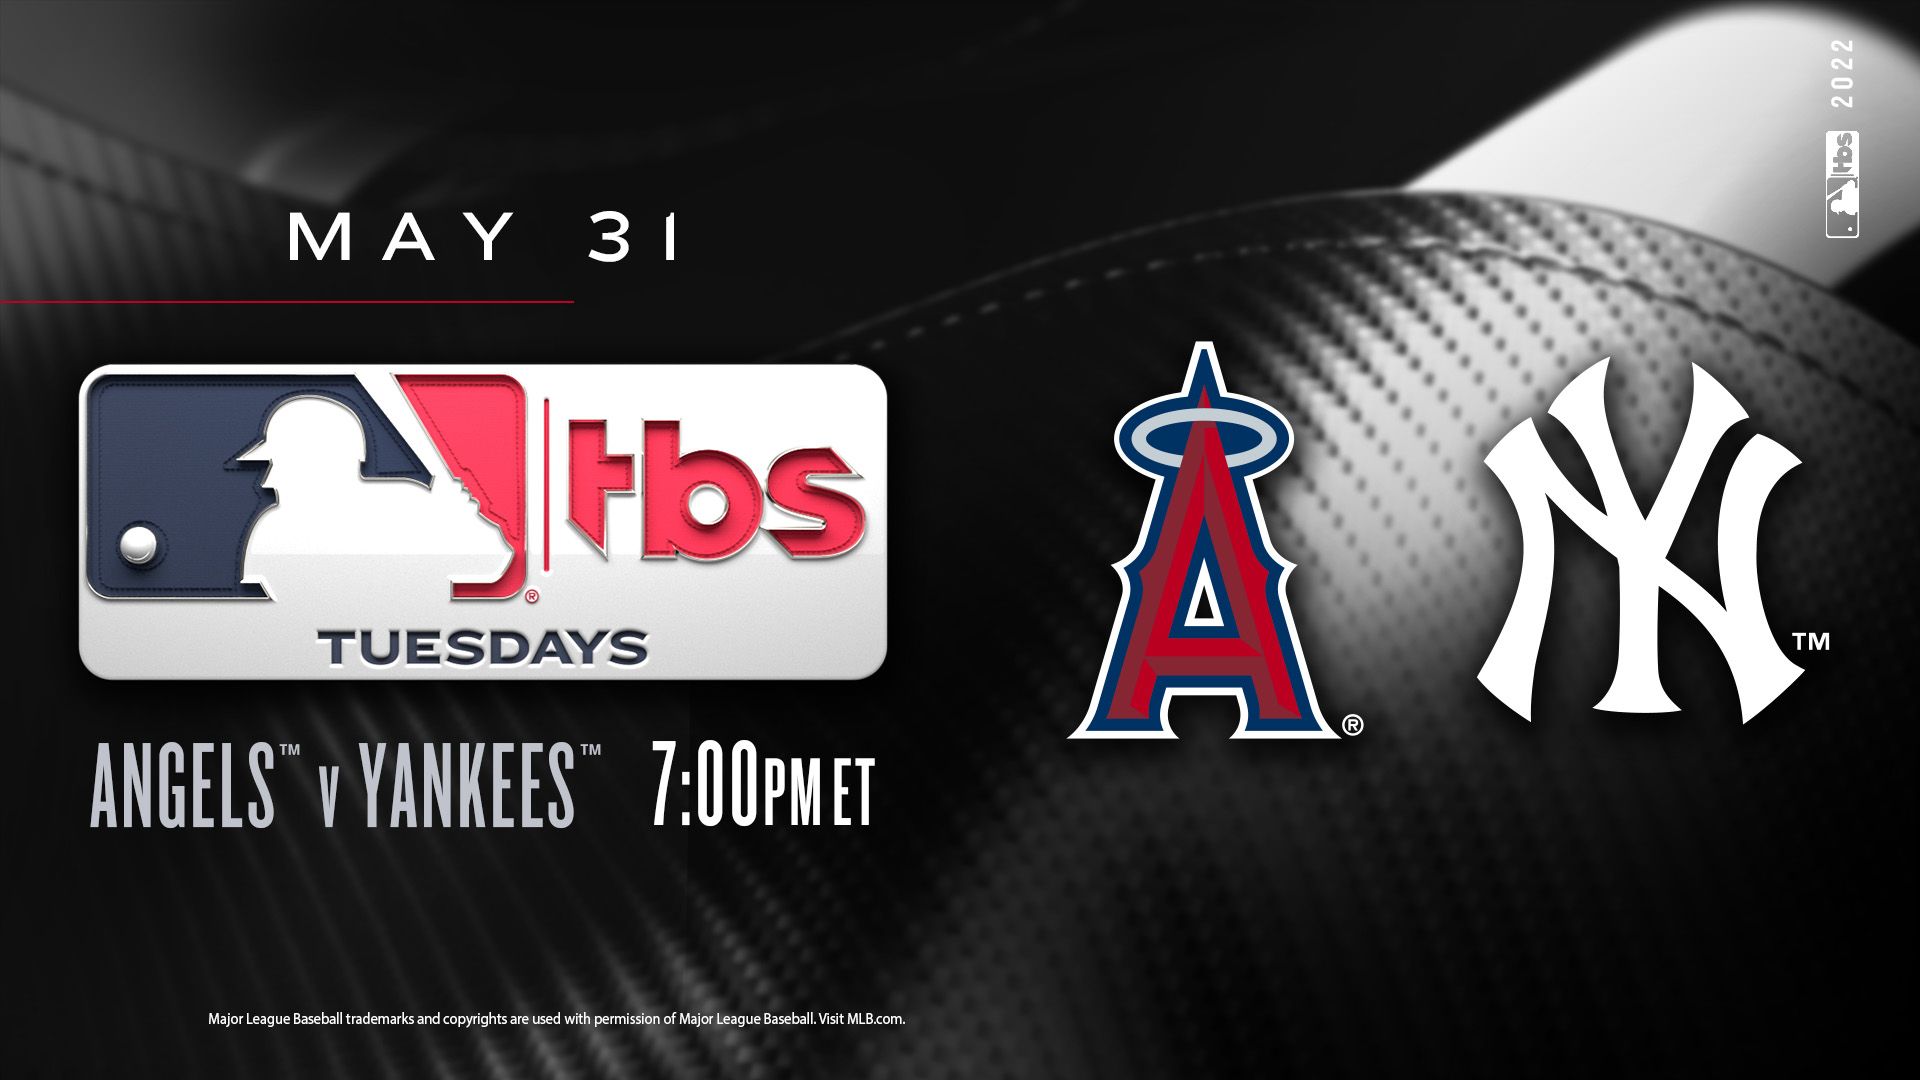 MLB on TBS Tuesday Night to Feature Star-Studded Matchup